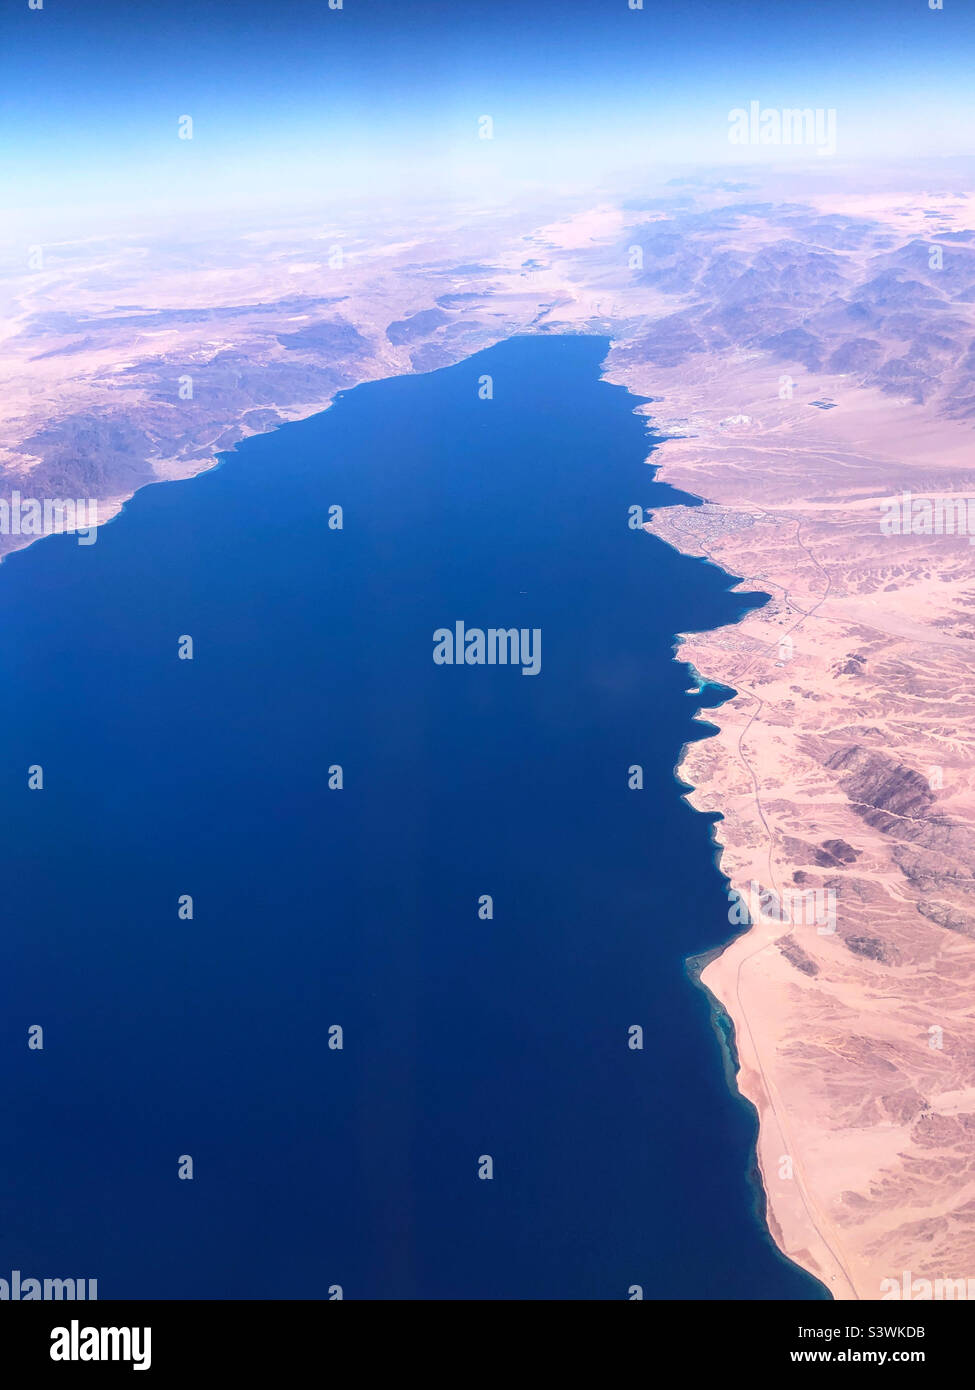 The Gulf of Aqaba ( Gulf of Eilat) from the air showing Saudi Arabia and Jordan on the right and Egypt on the left. Stock Photo